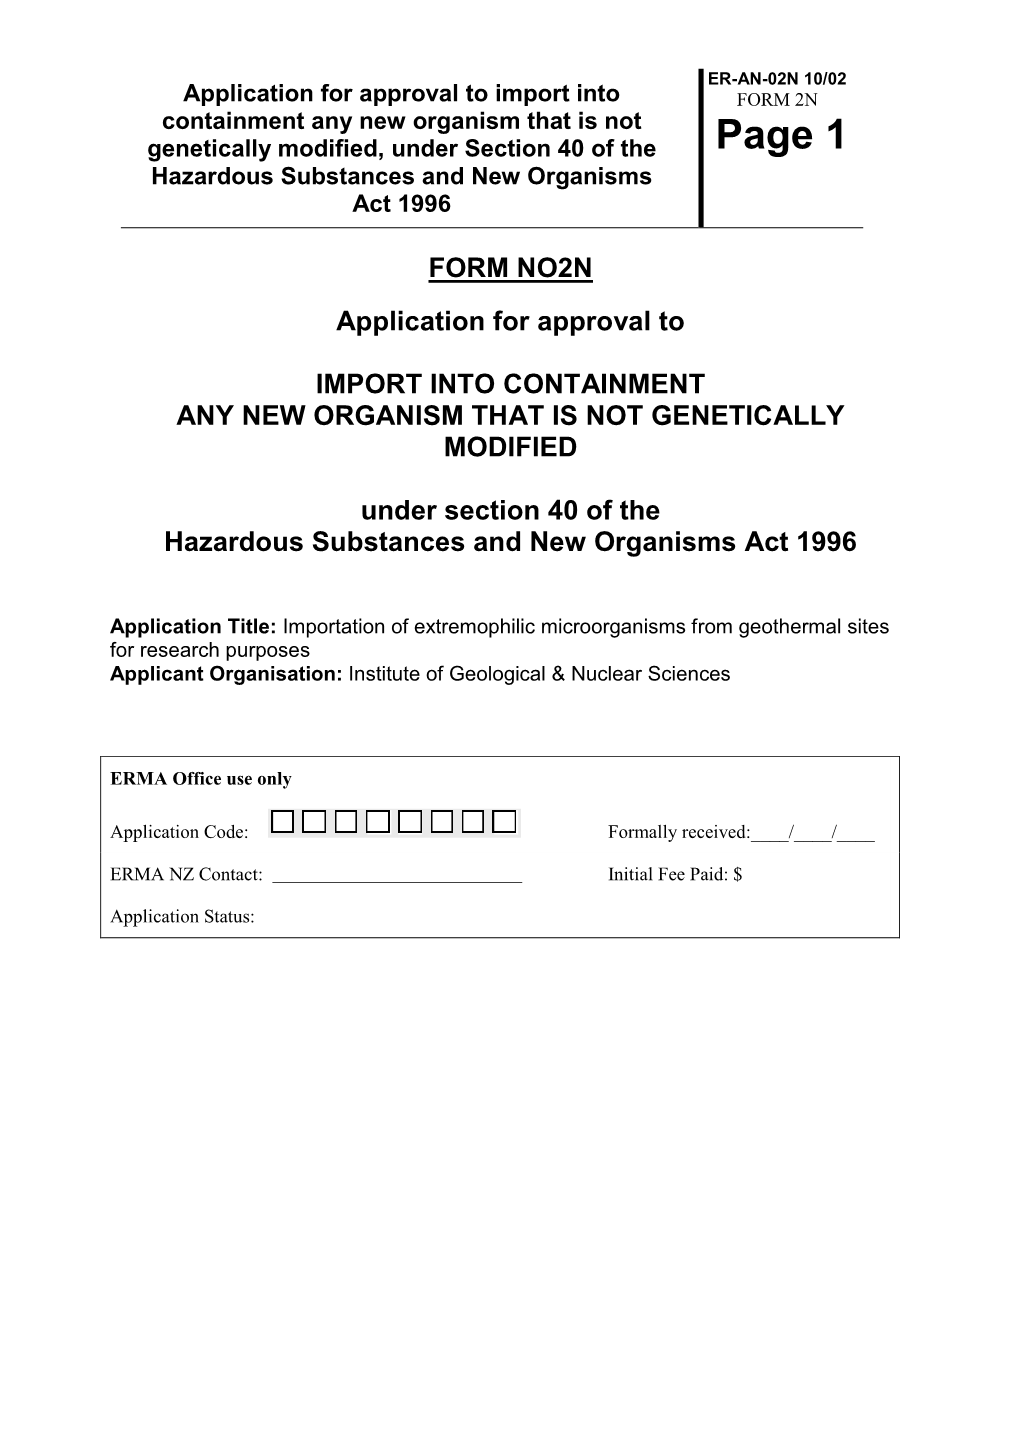 Application for Approval to Import Into Containment Any New Organism That